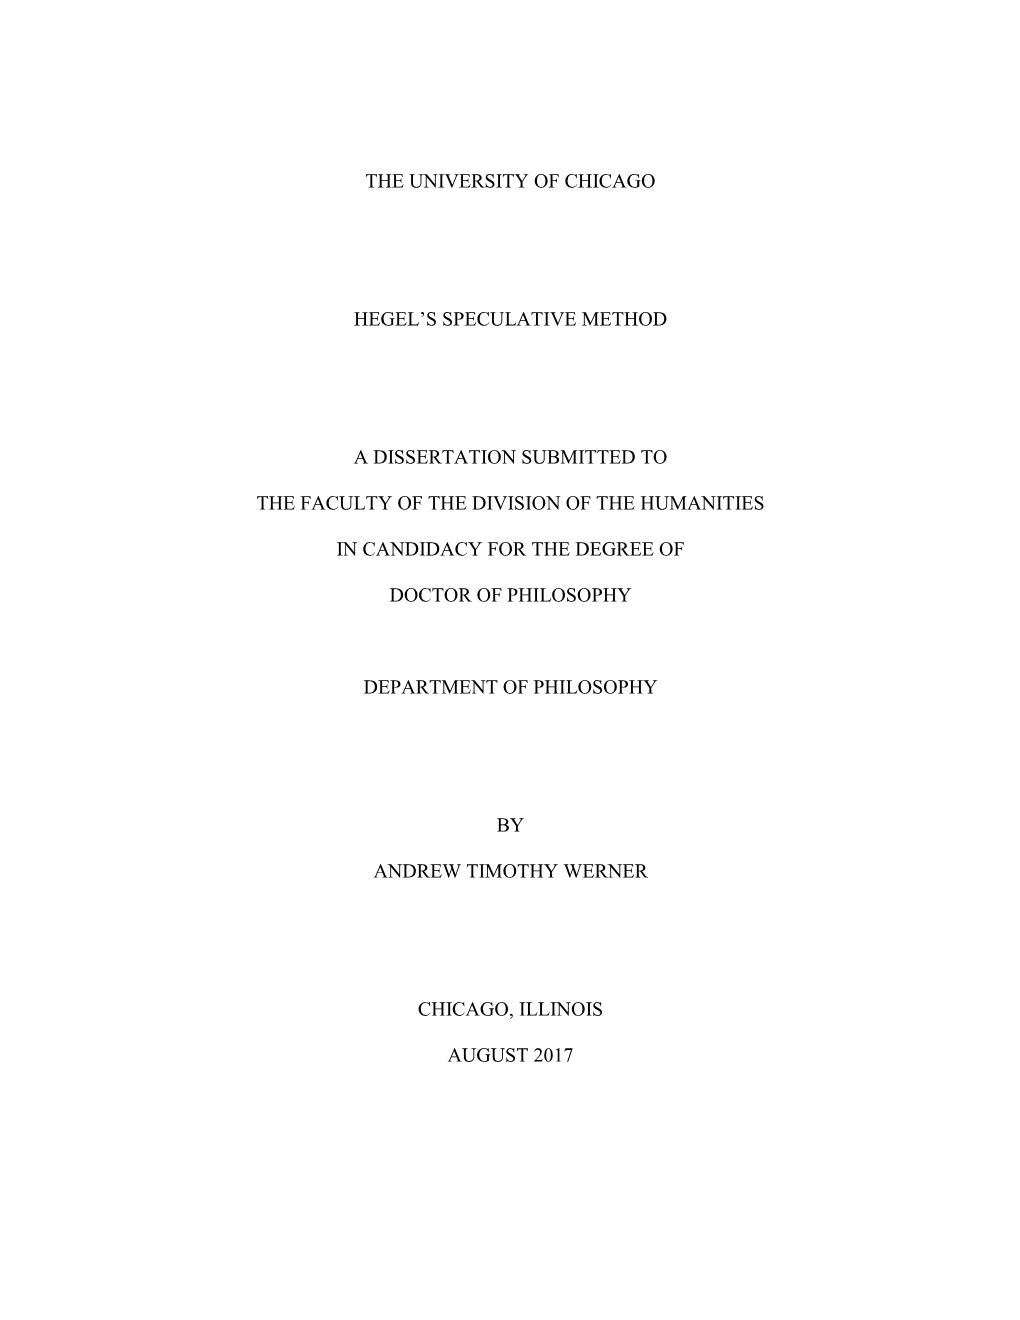 The University of Chicago Hegel's Speculative Method a Dissertation Submitted to the Faculty of the Division of the Humanities